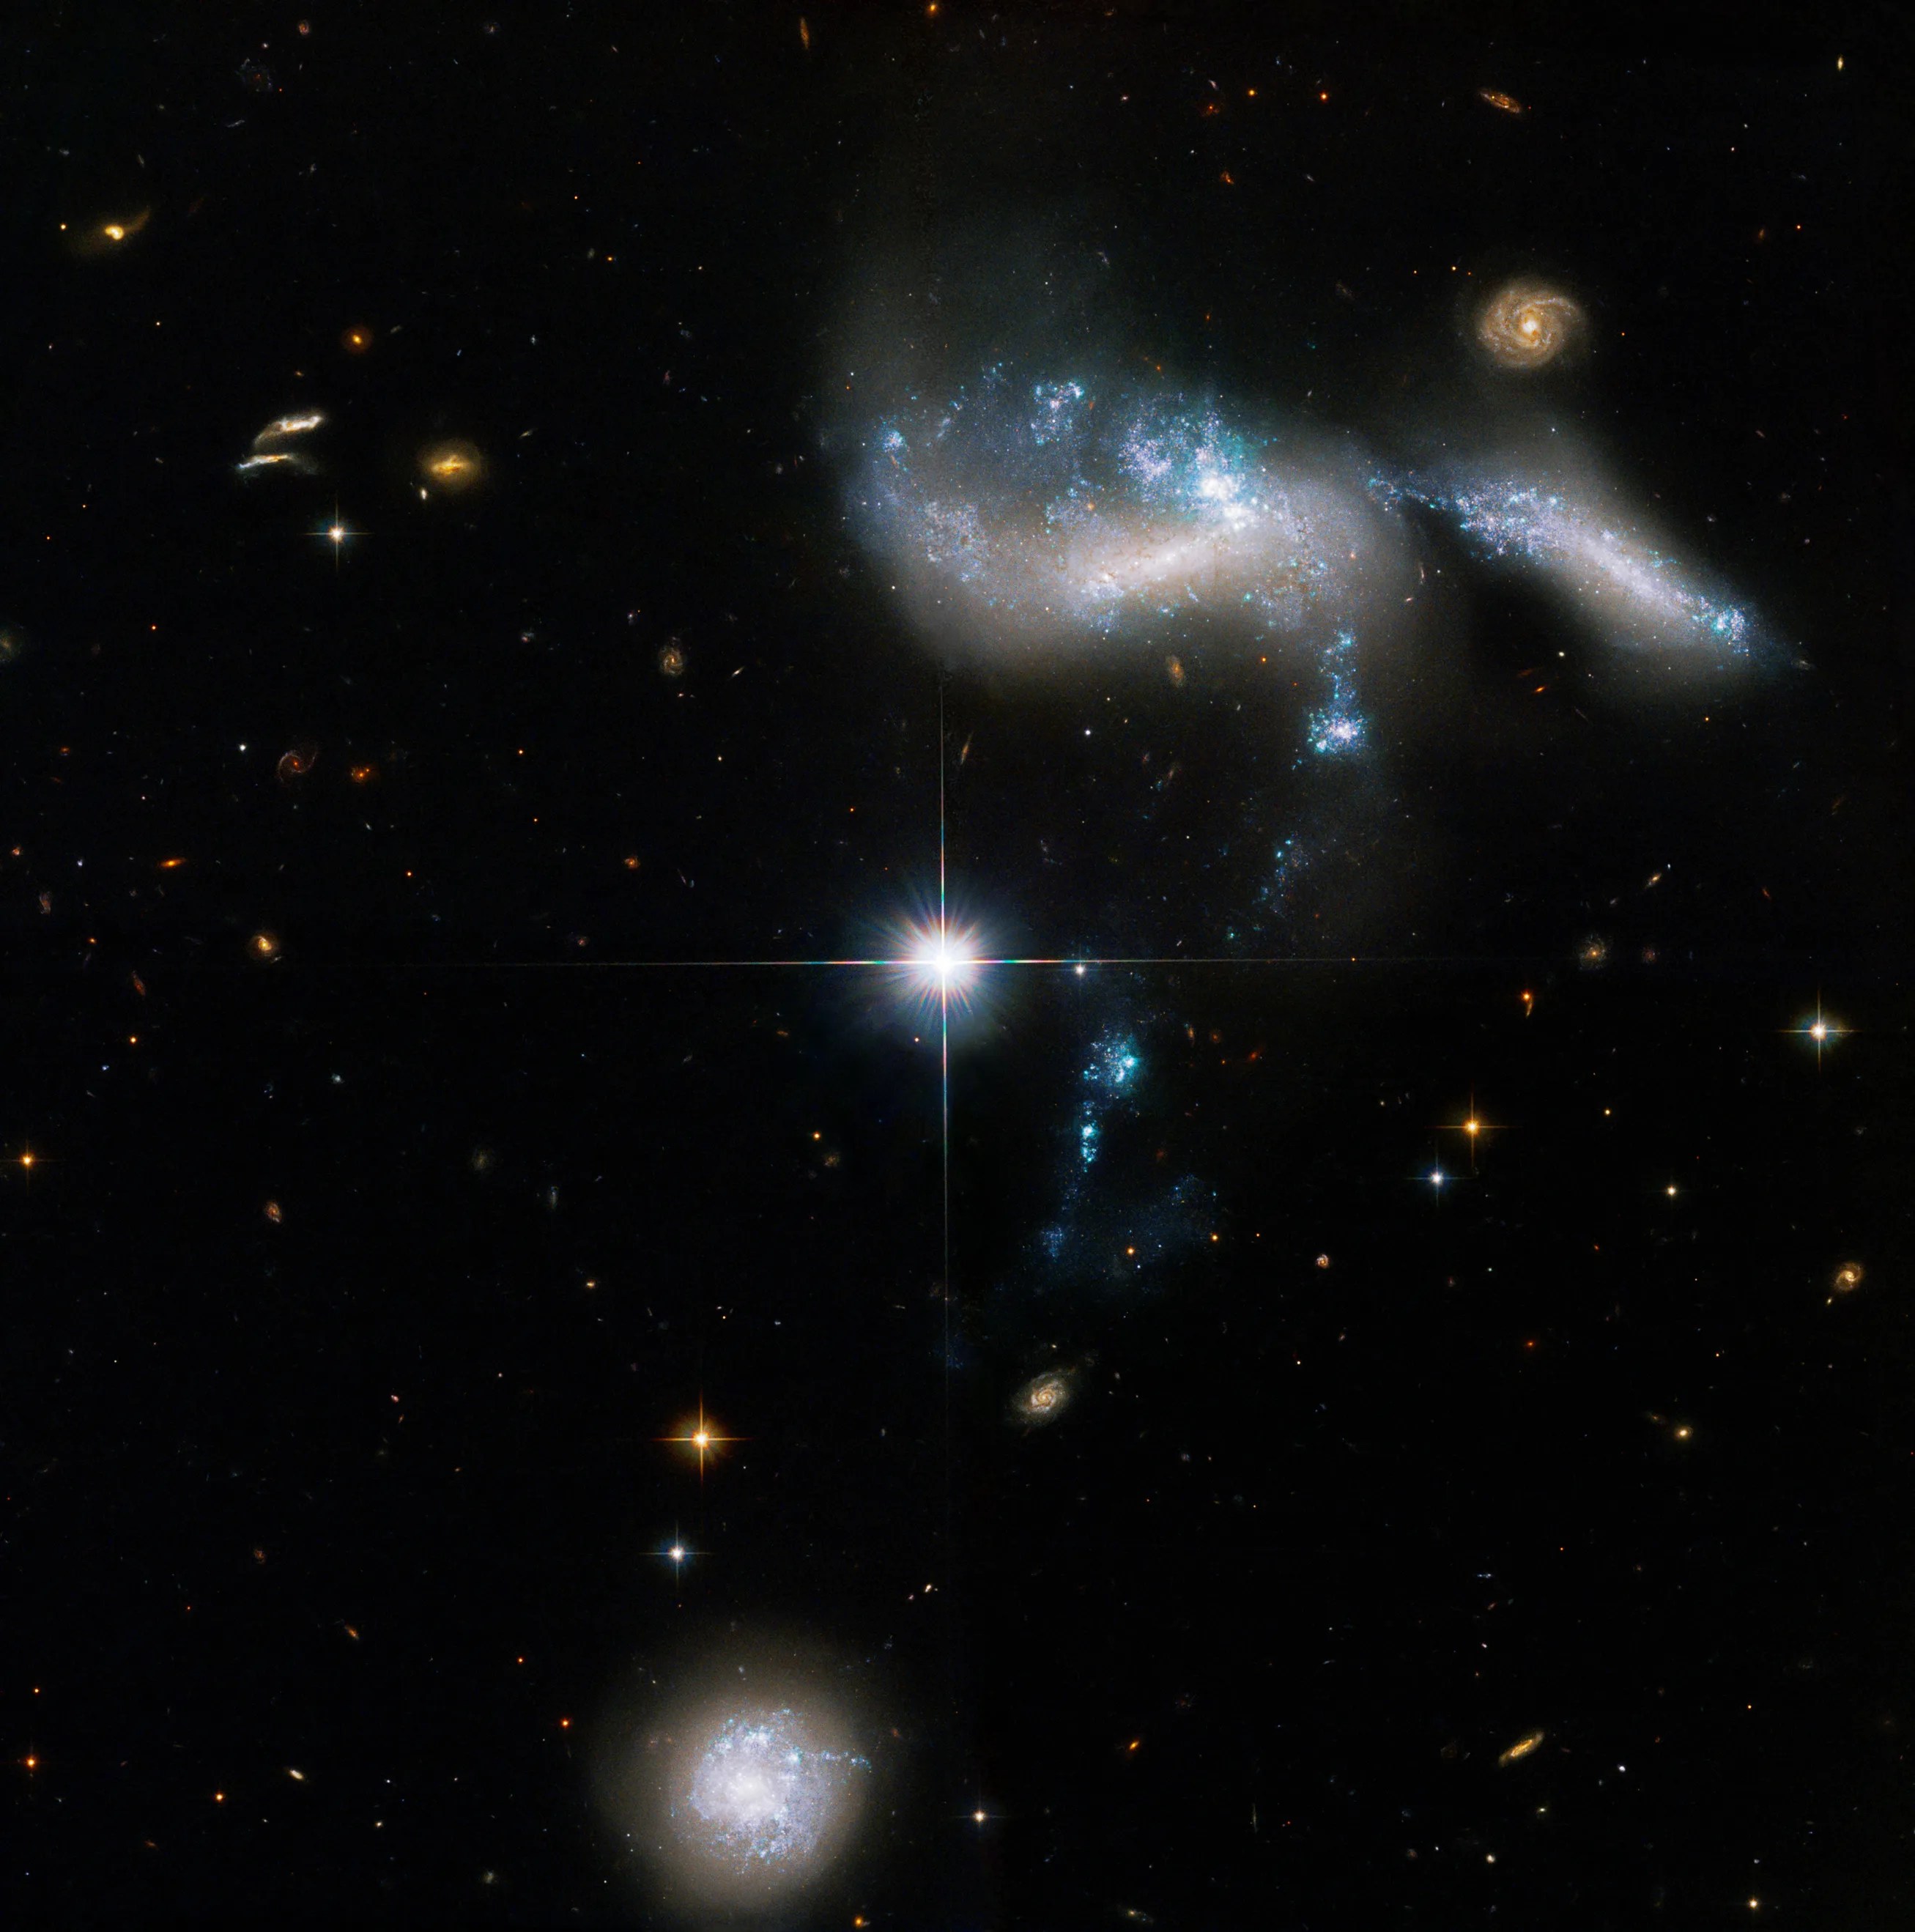 A bright star at image center, above it are two galaxies merging with bright blue star forming regions. a stream of blue-white stars trails off to the bottom of the image just left of center to another dwarf galaxy at the bottom of the image.